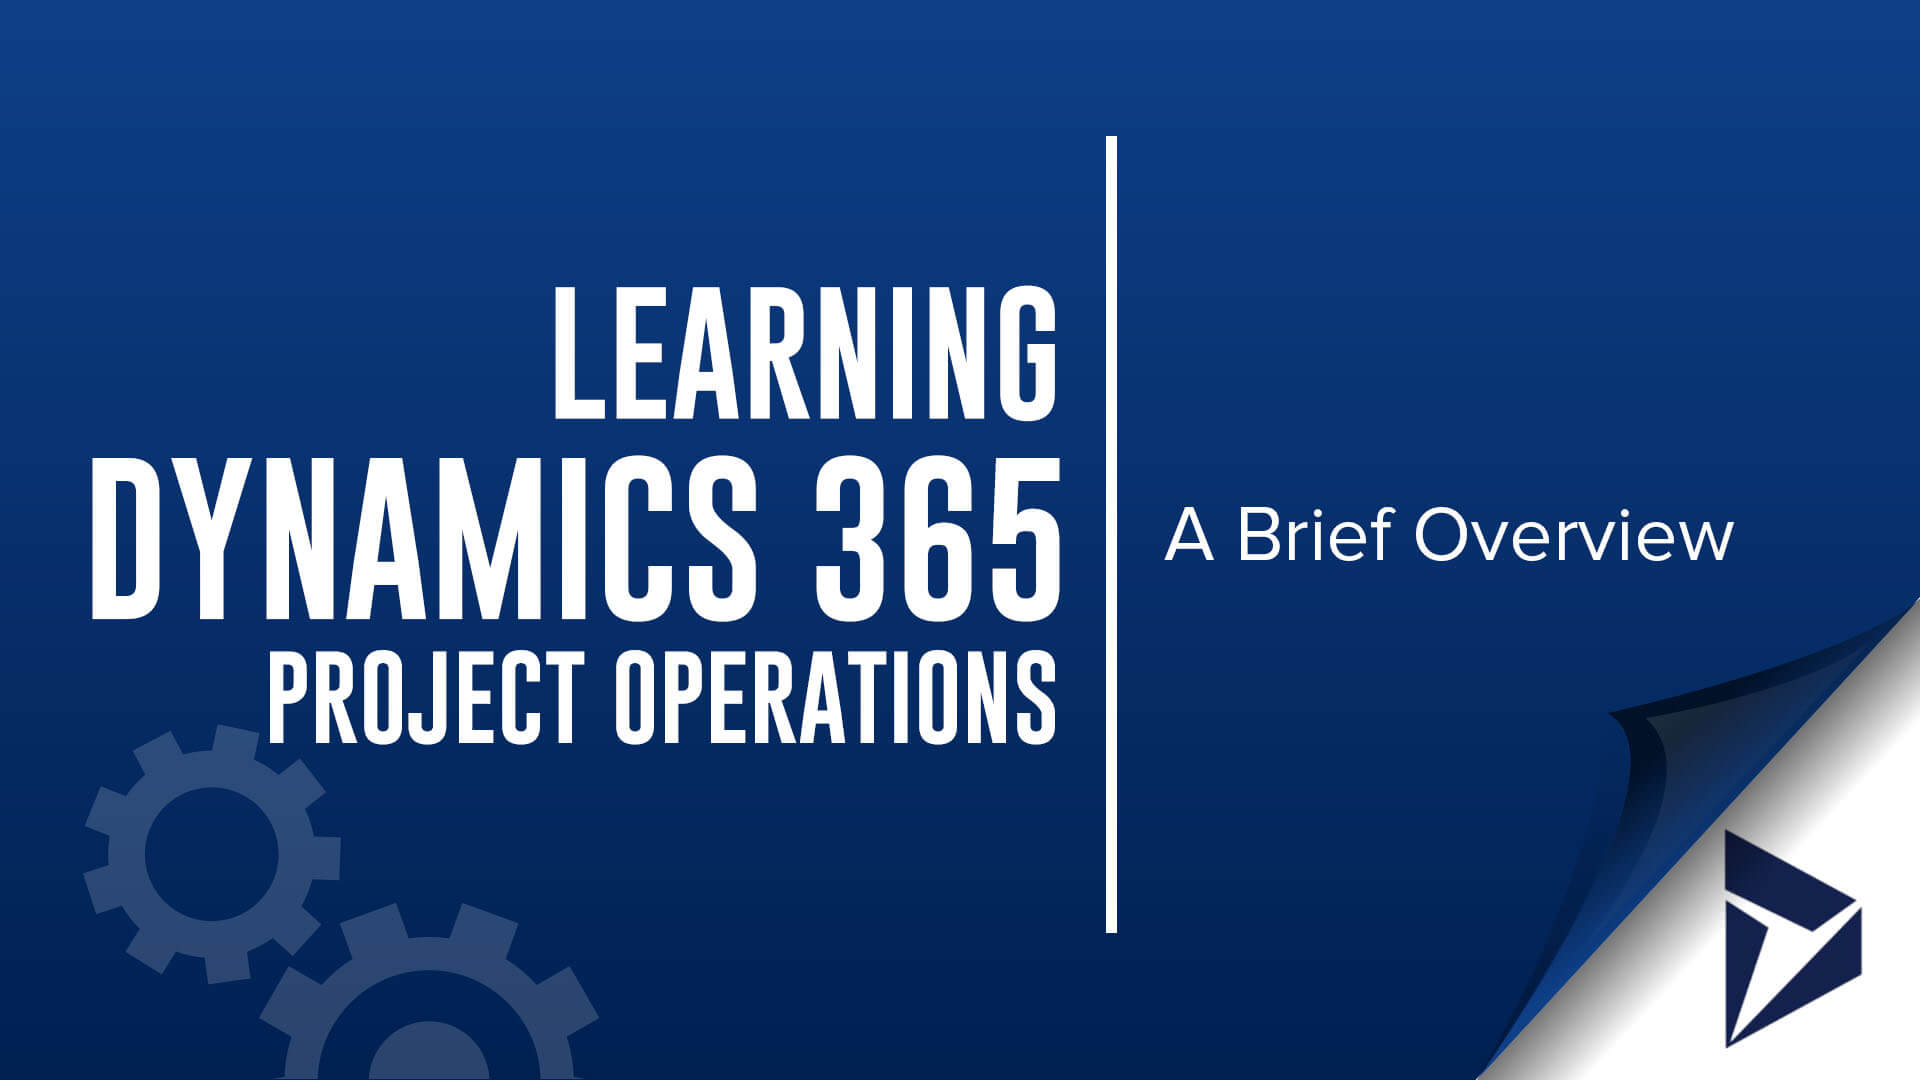 learning dynamics Project operations - a brief overview